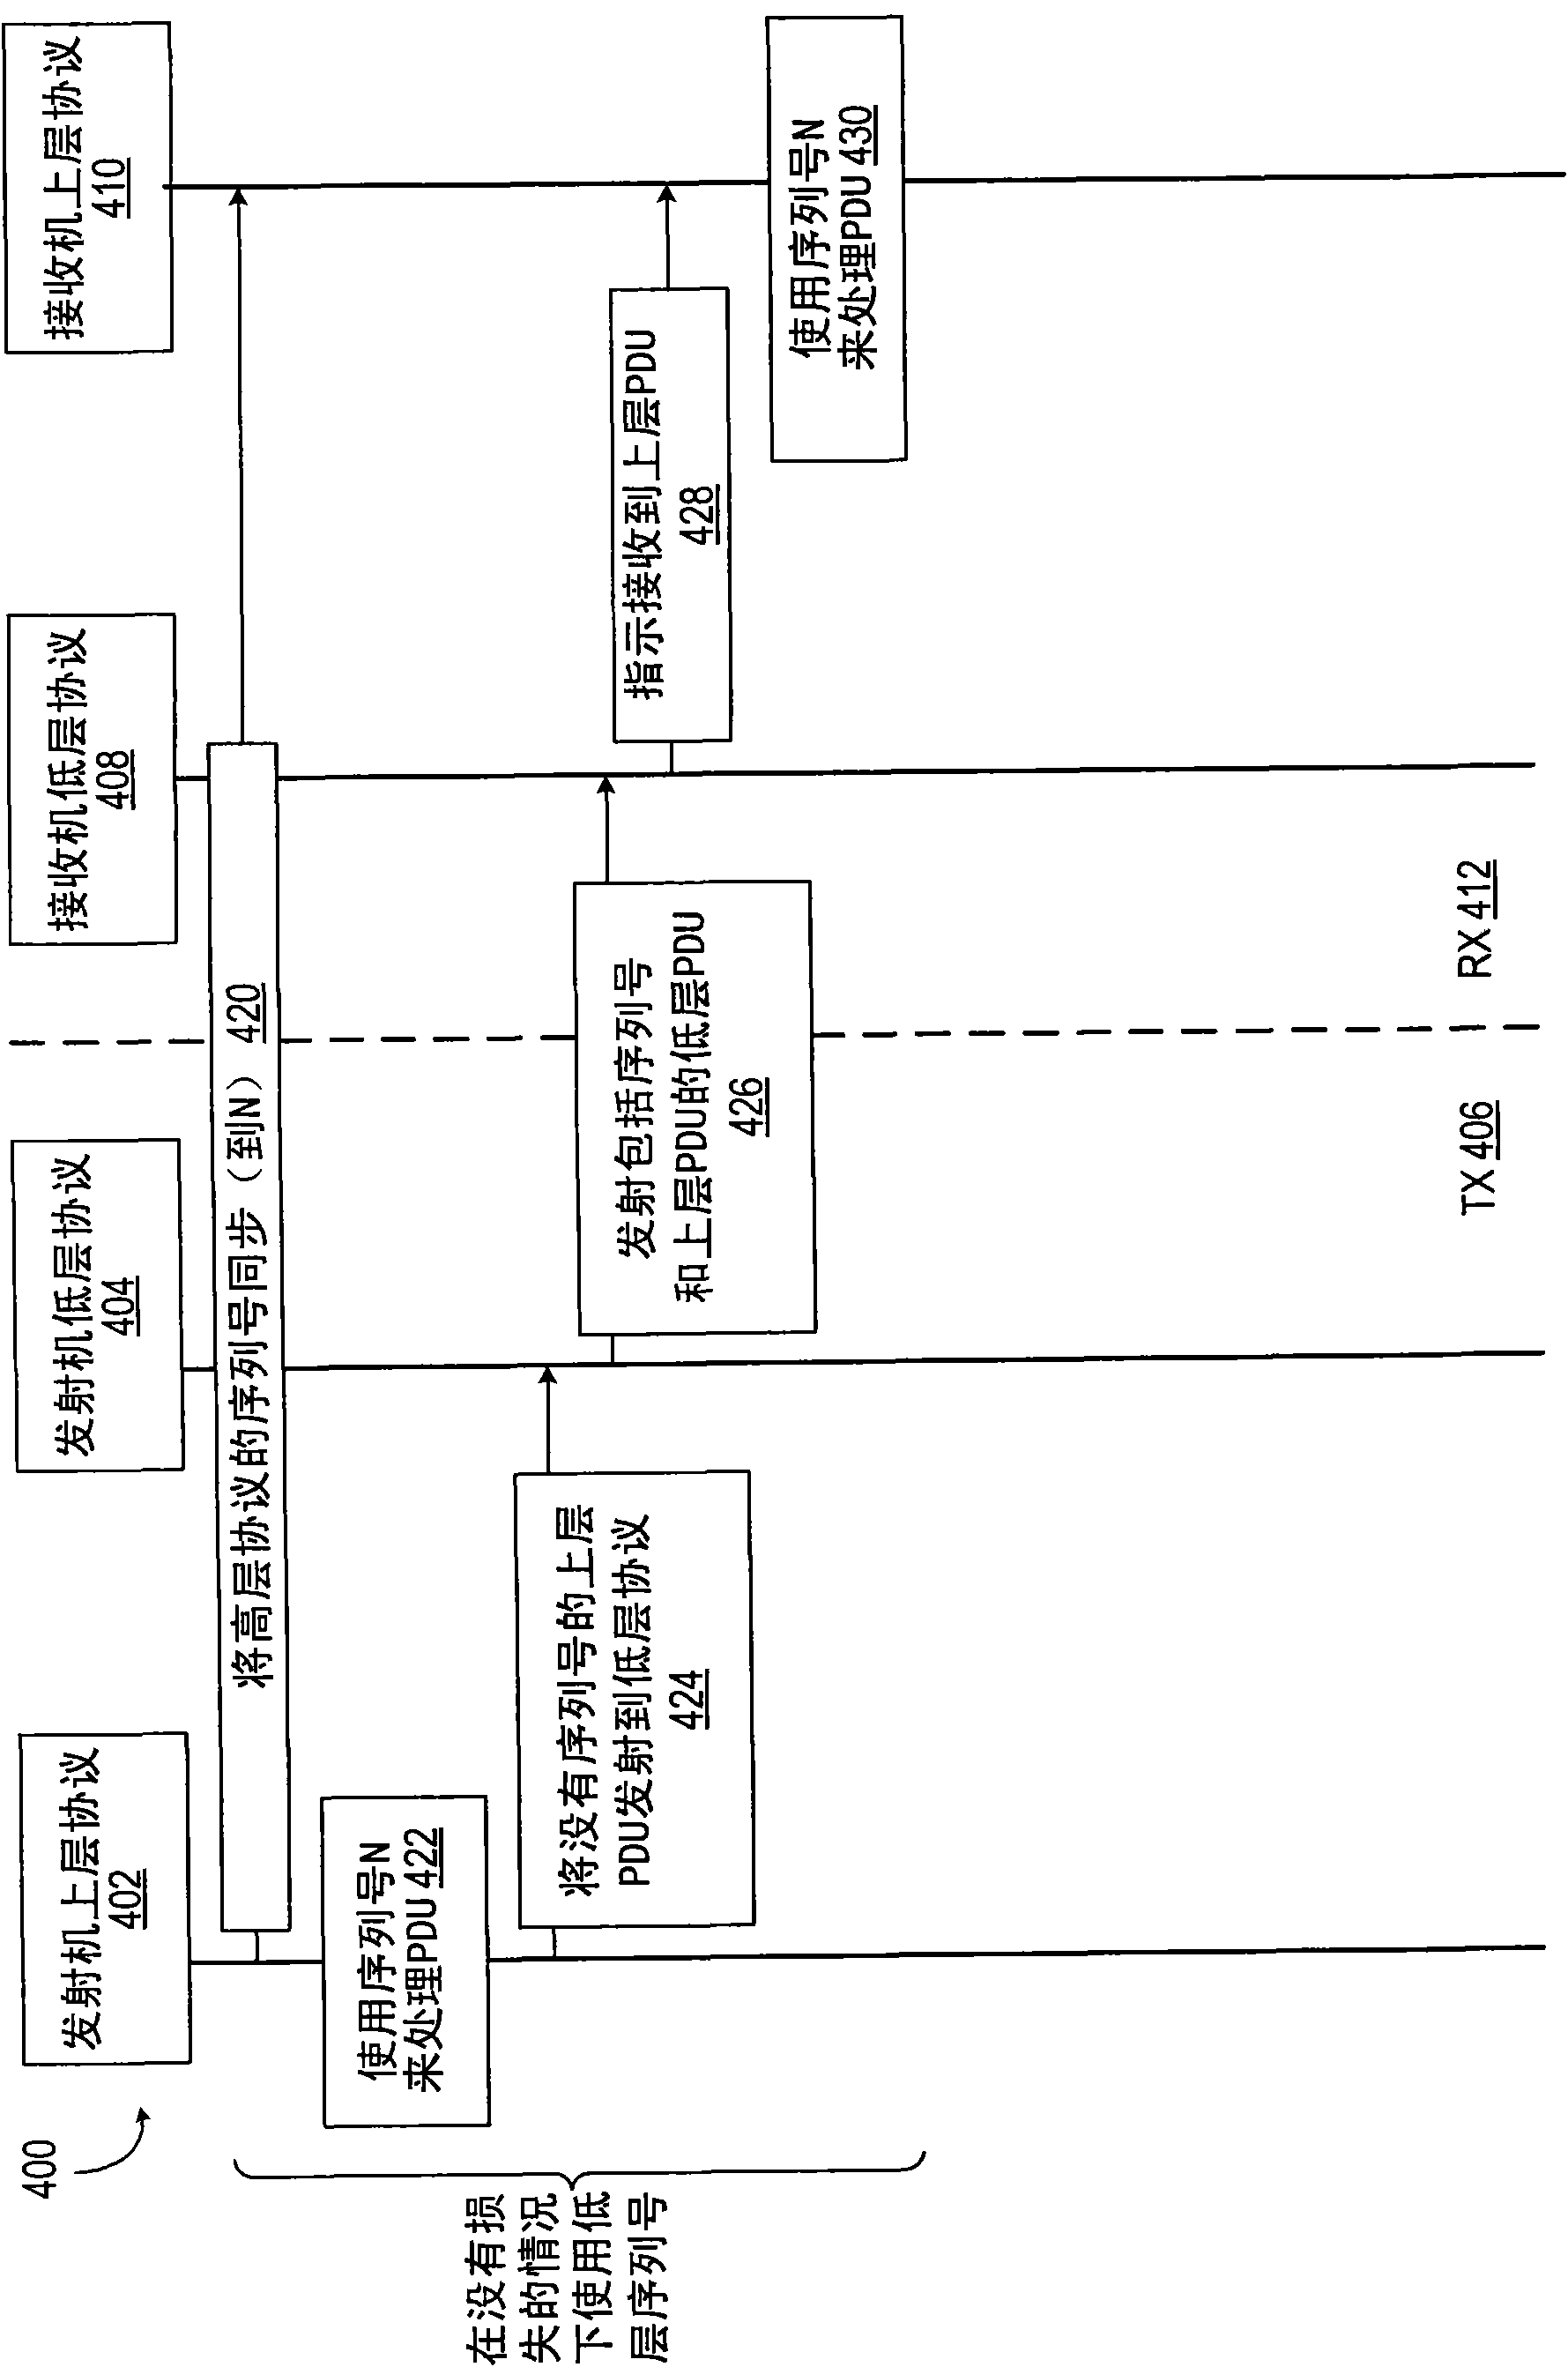 Ciphering sequence number for an adjacent layer protocol in data packet communications